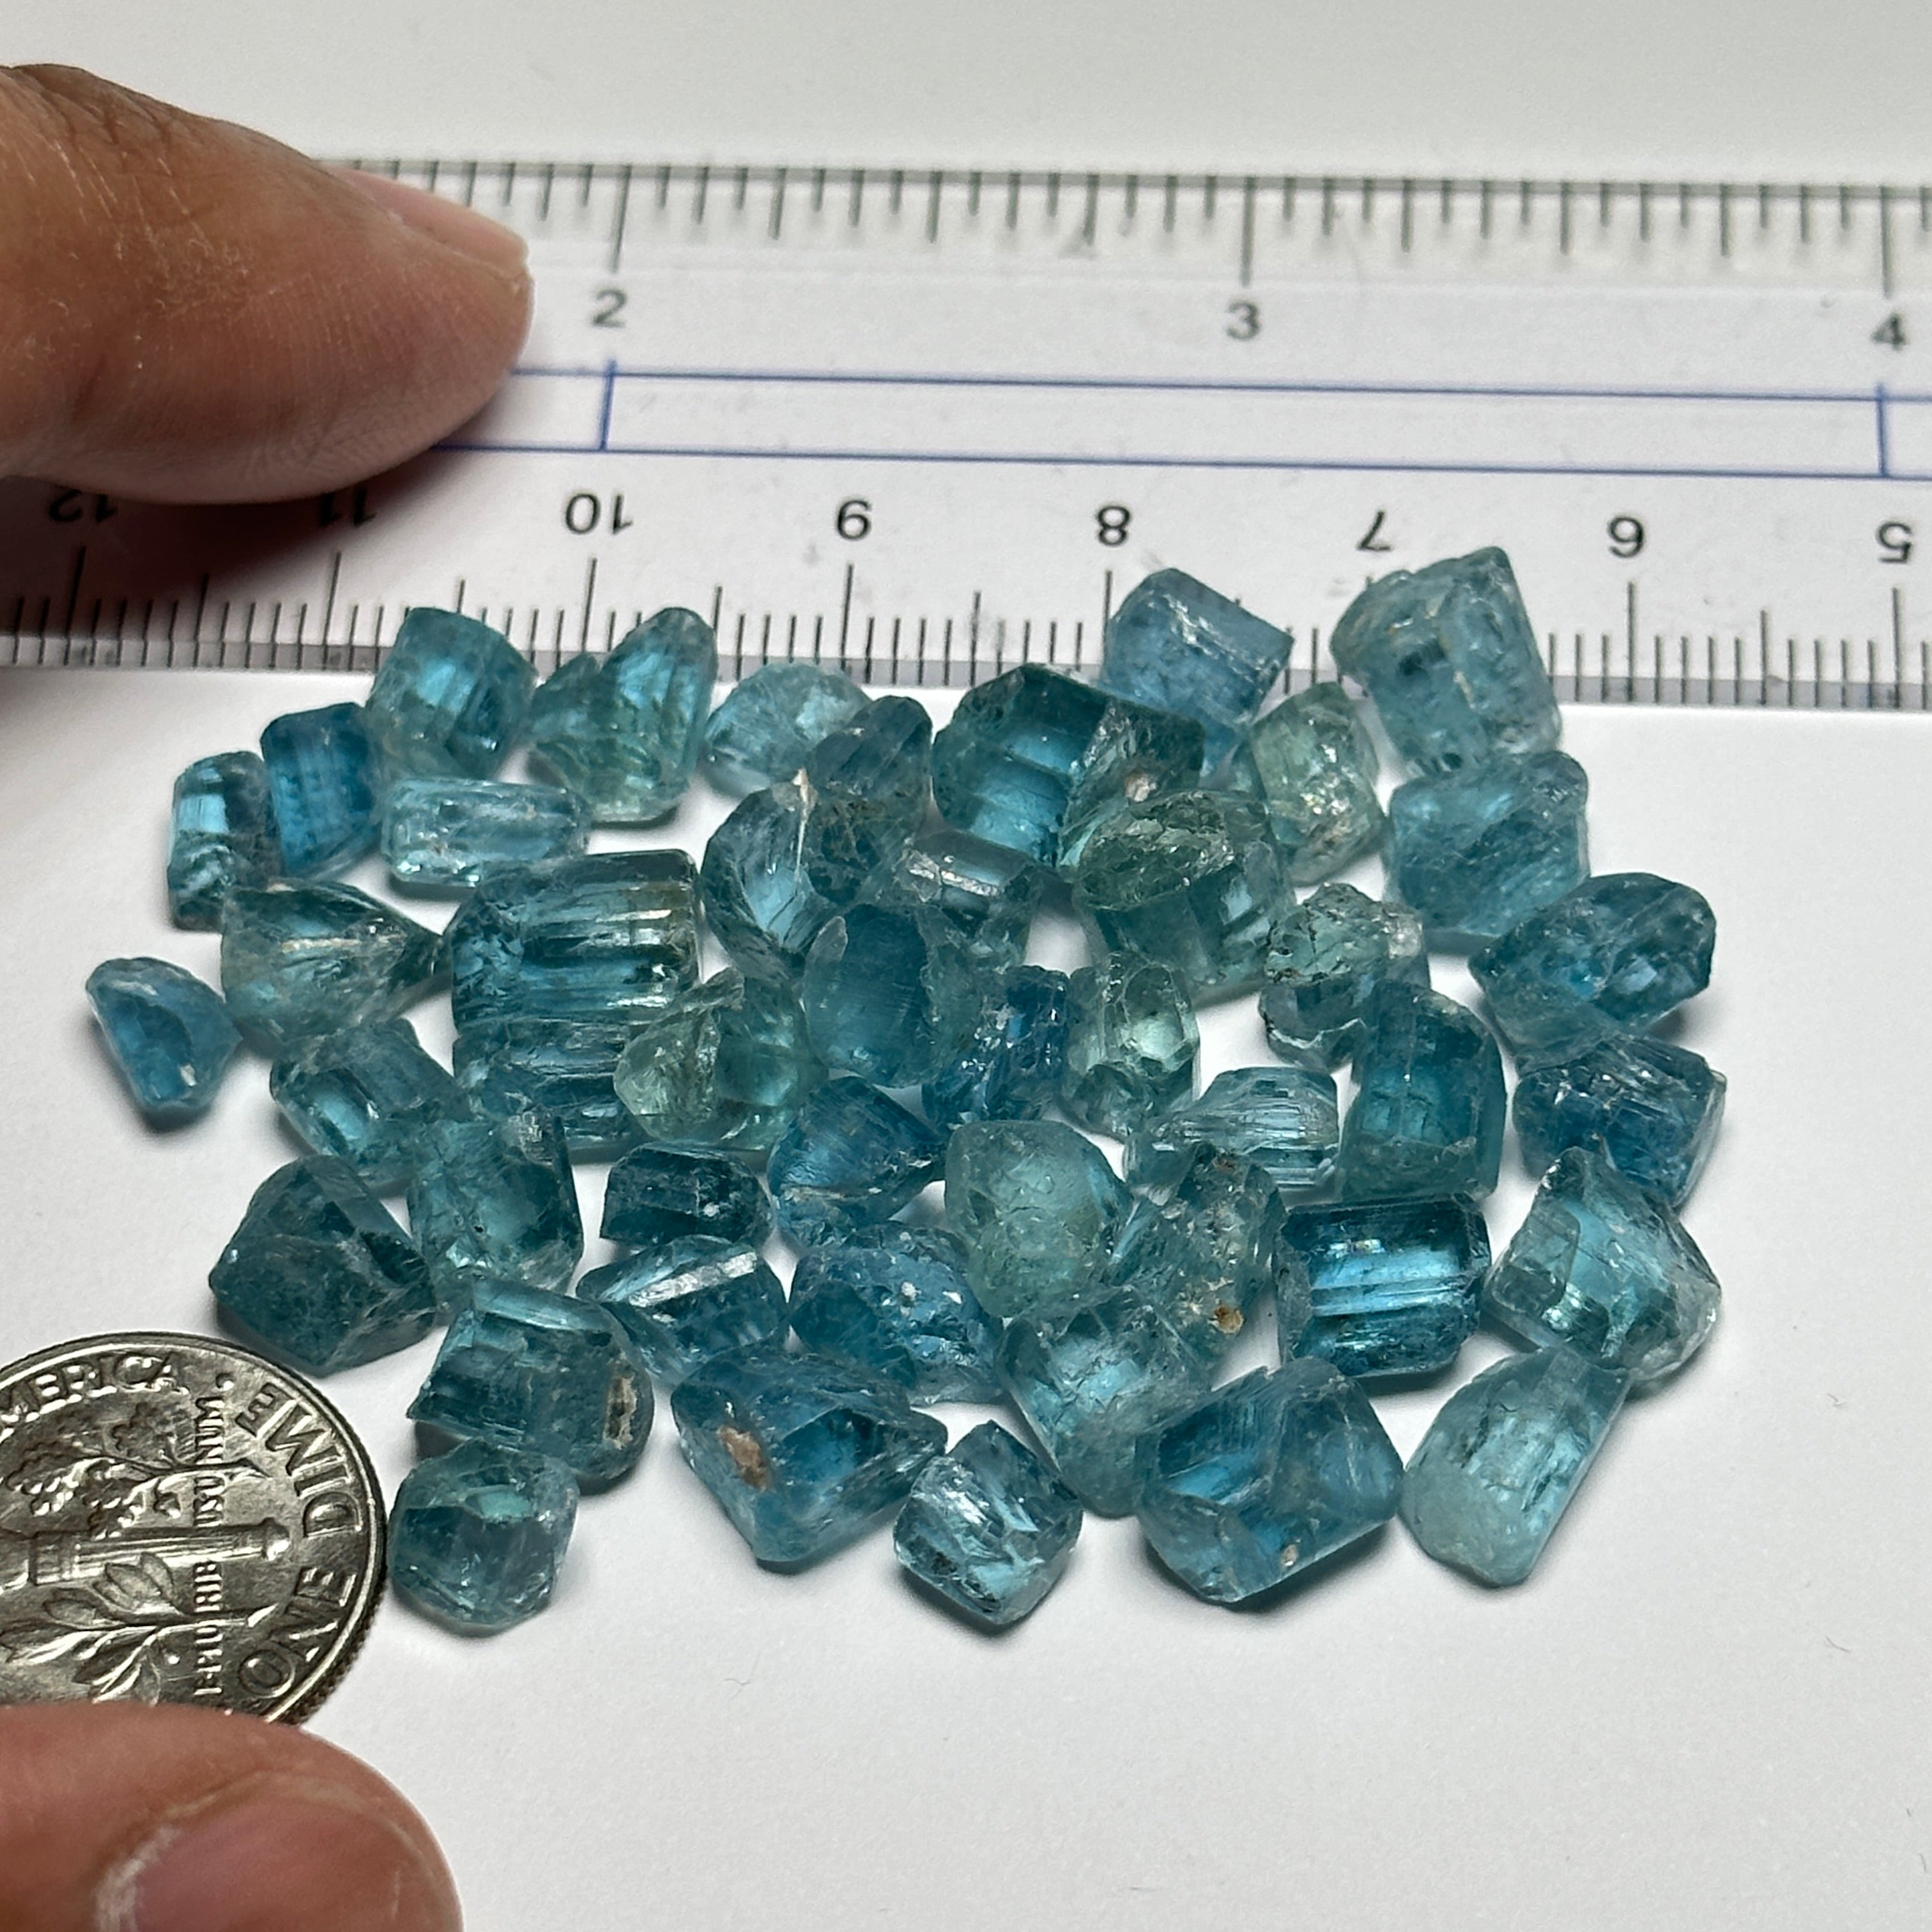 94.15ct Extraordinarily RARE, Blue Apatite Crystals Lot from Merelani, Karo Pit in Block D, Tanzania. Untreated Unheated, 0.86ct - 4.04ct